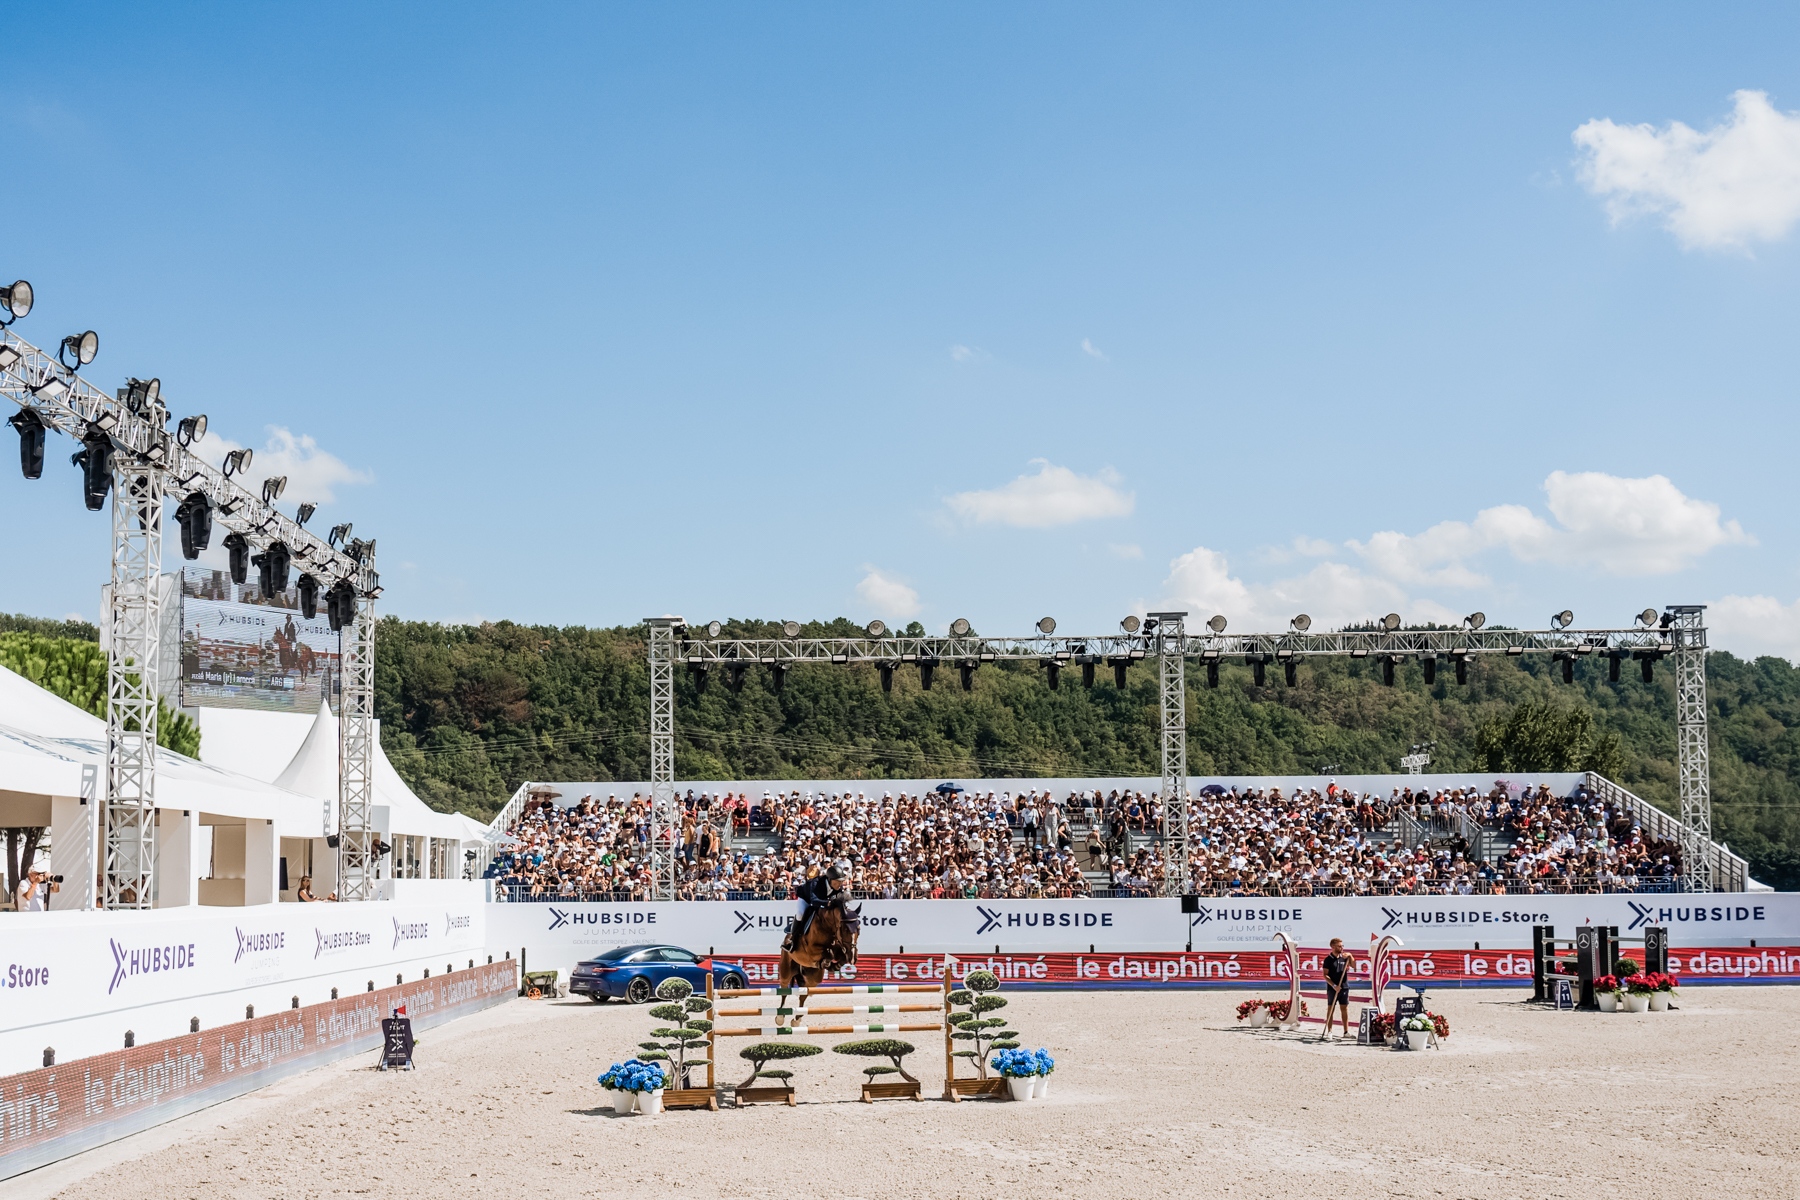 Marie Demonte leads price giving of CSI3* Grand Prix of Hubside